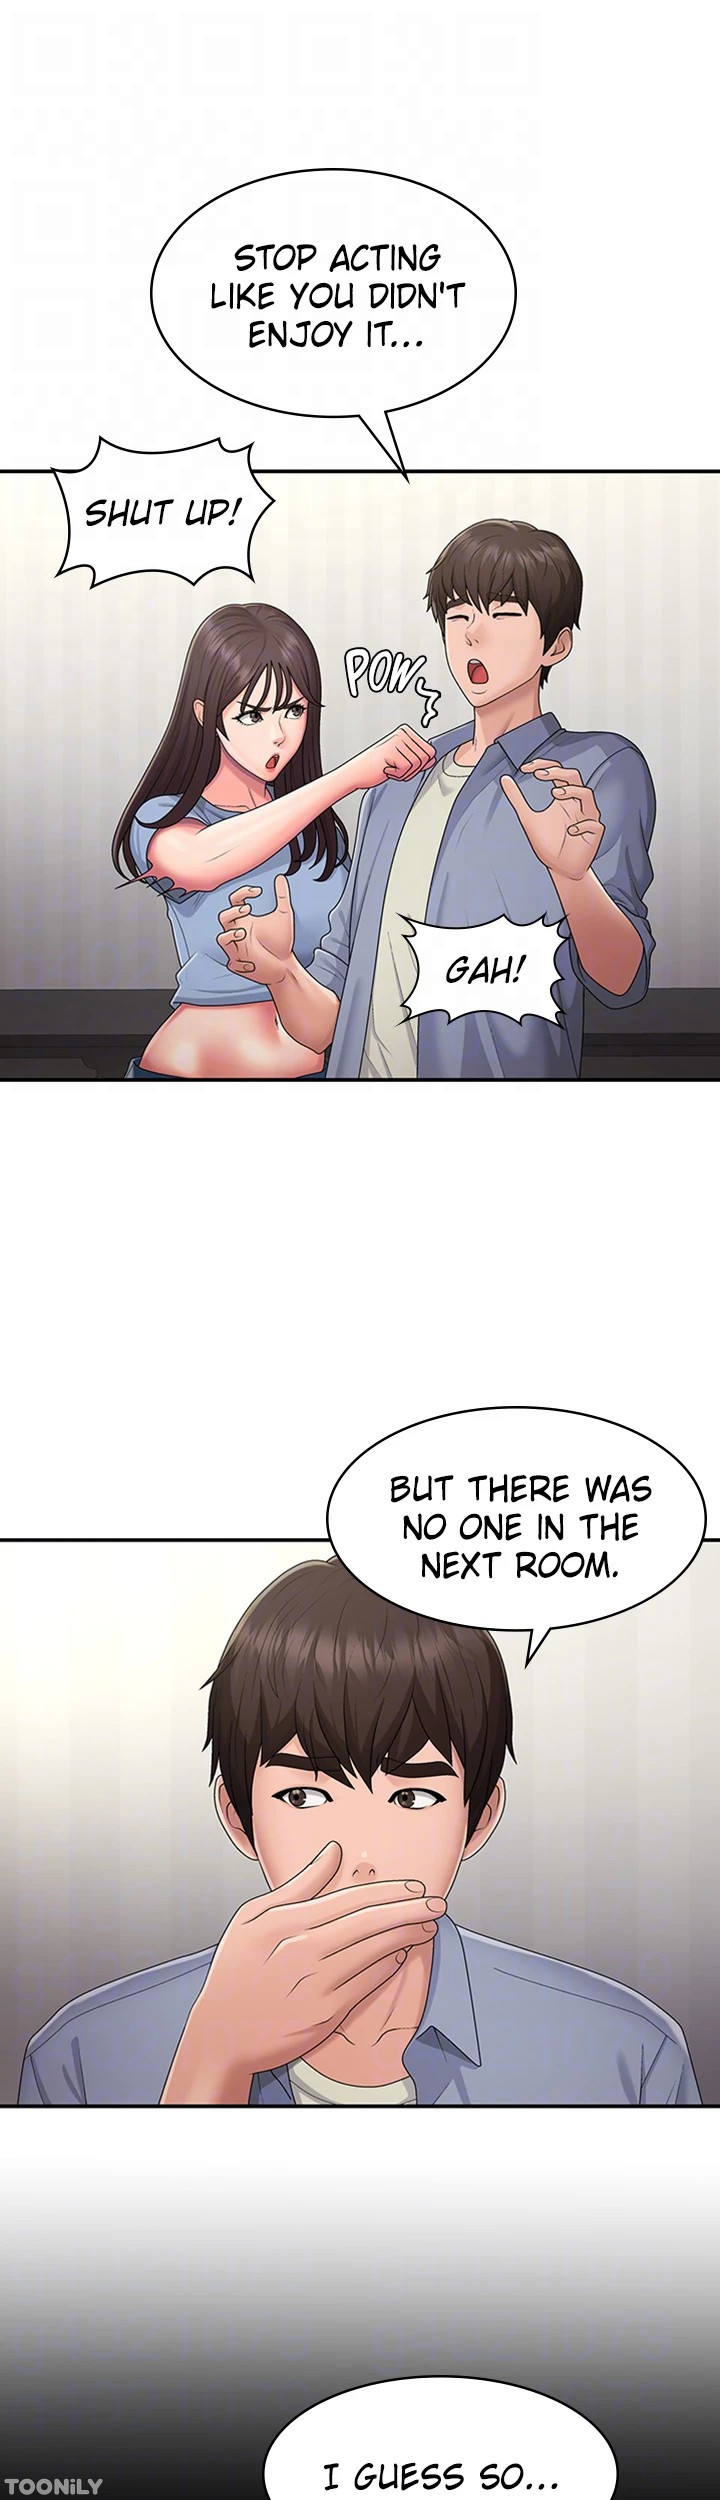 My Aunt in Puberty - Chapter 48 Page 11